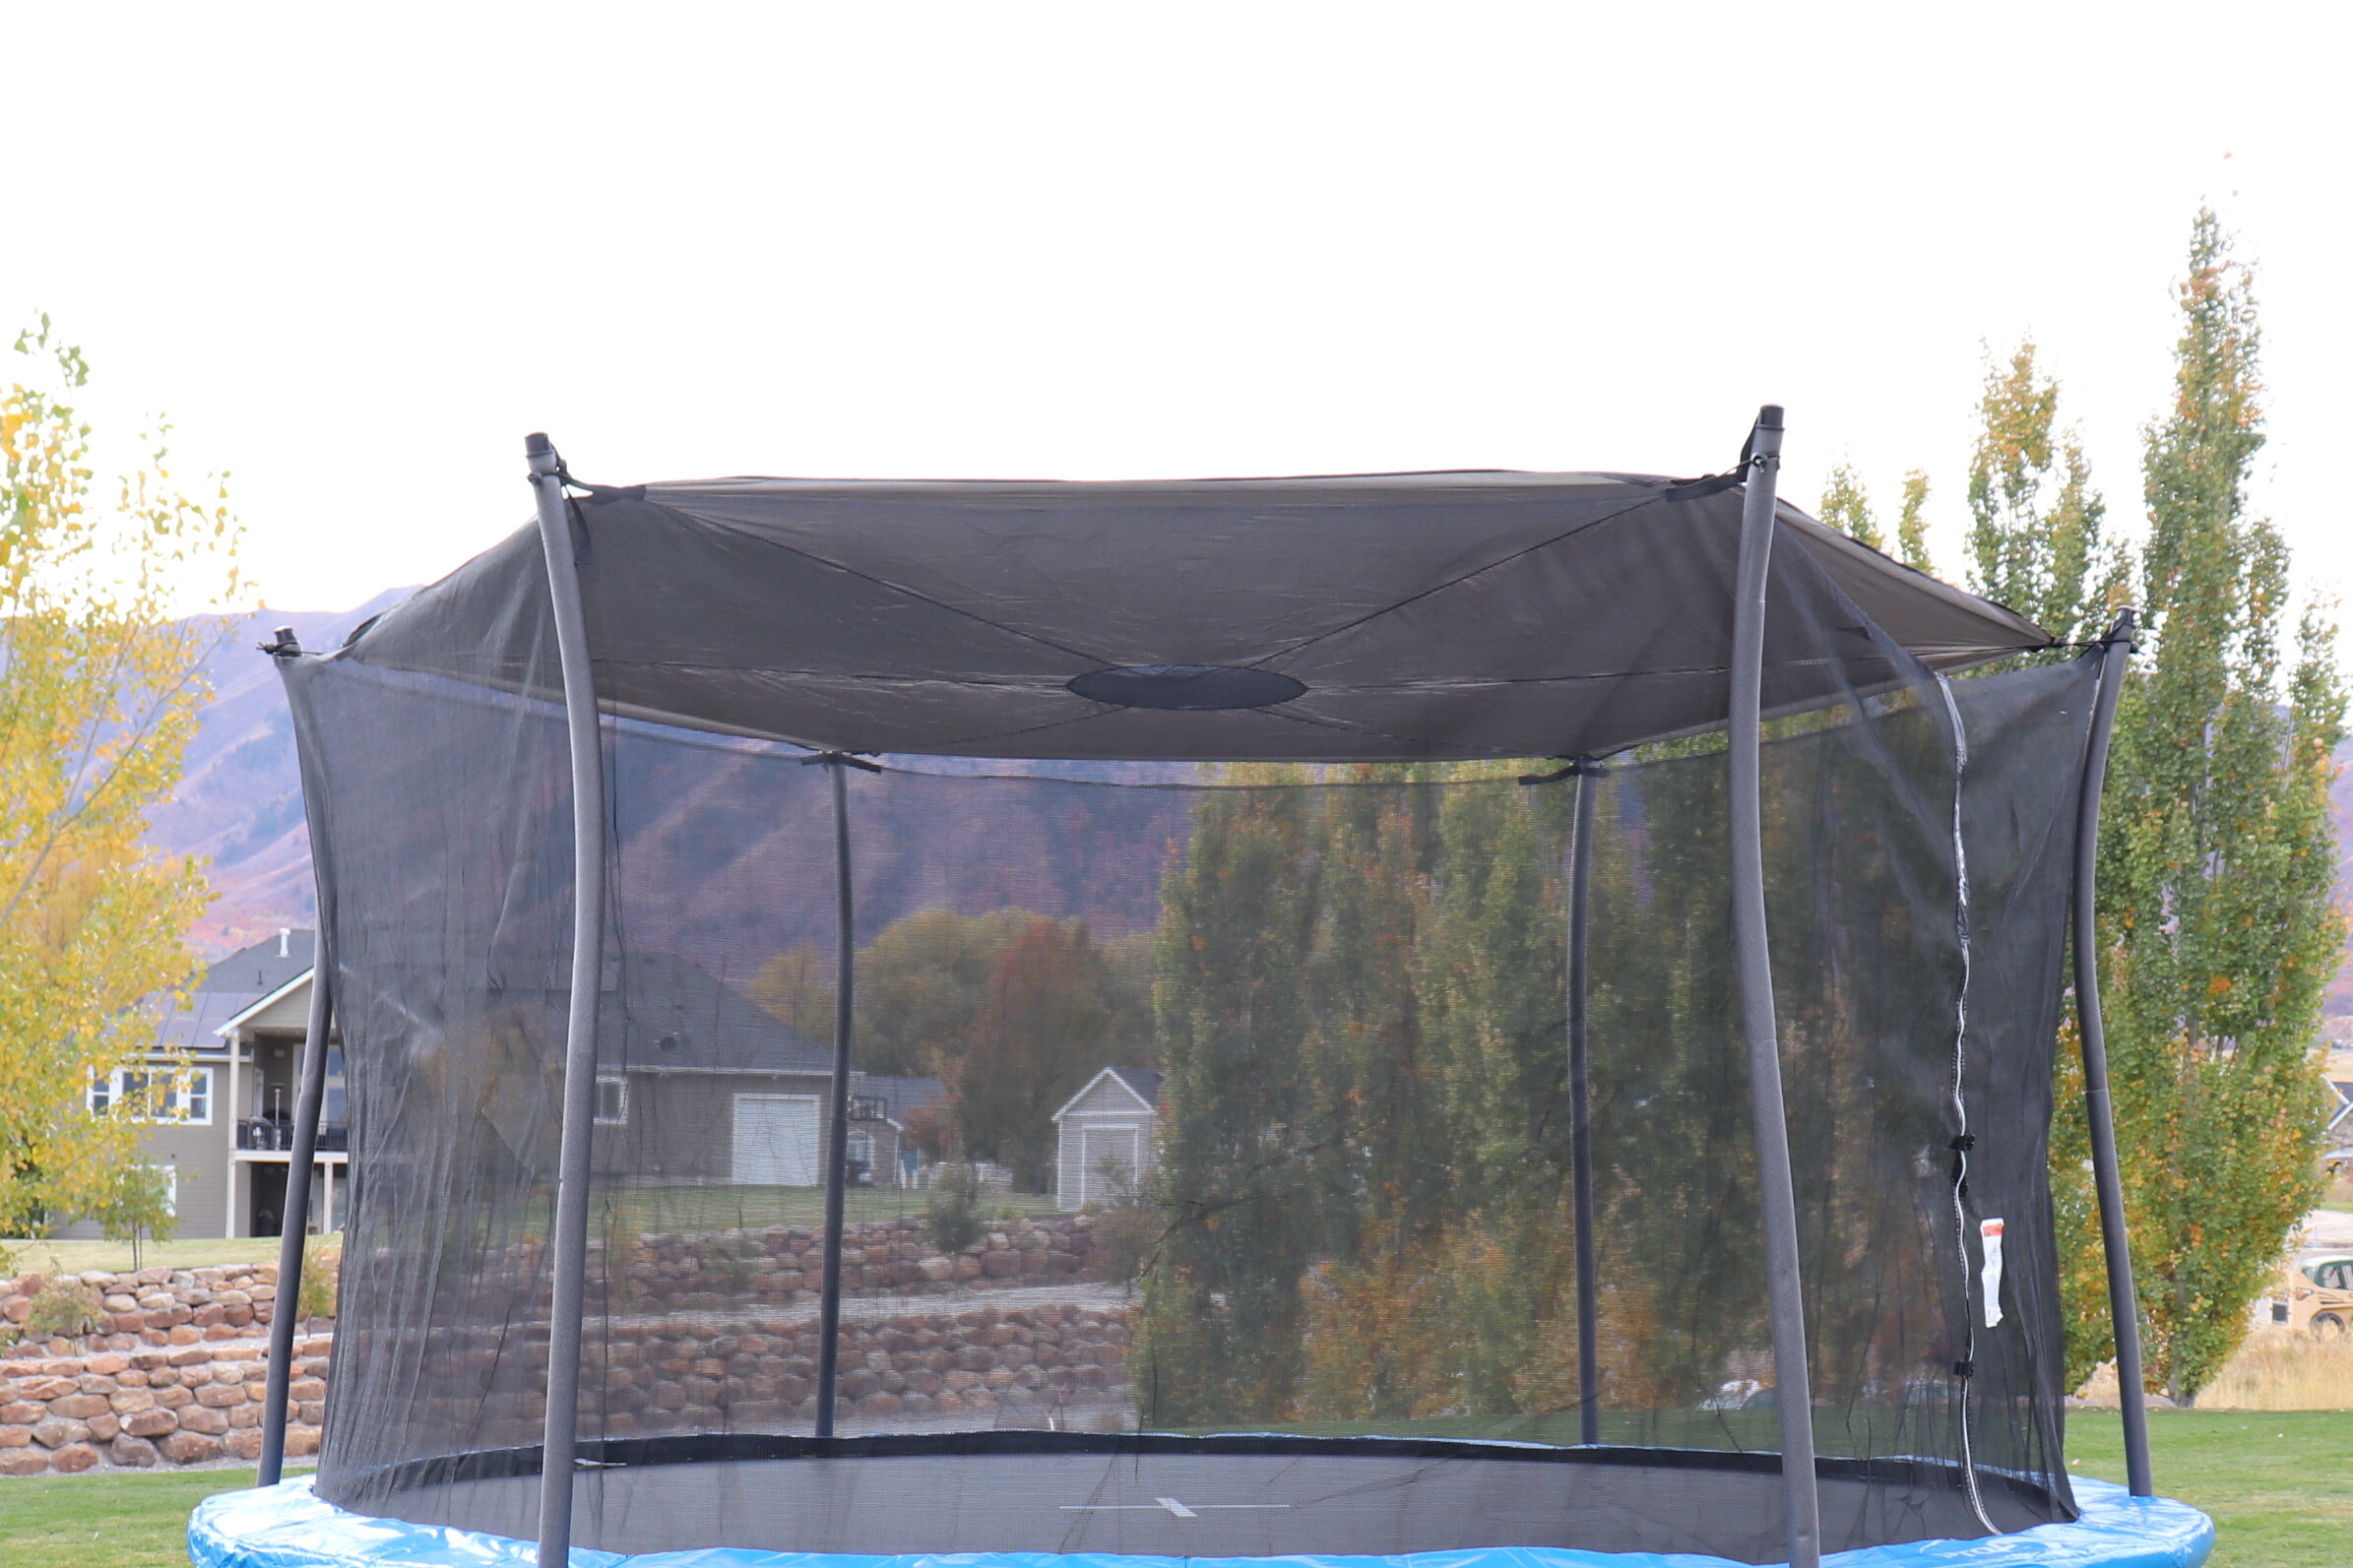 ZERO GRAVITY Ultima Trampoline Cover UV Resistant 180GSM Thick Material 6ft 8ft 10ft 12ft 14ft Will Fit Any Trampoline Protection From Weather and Debris